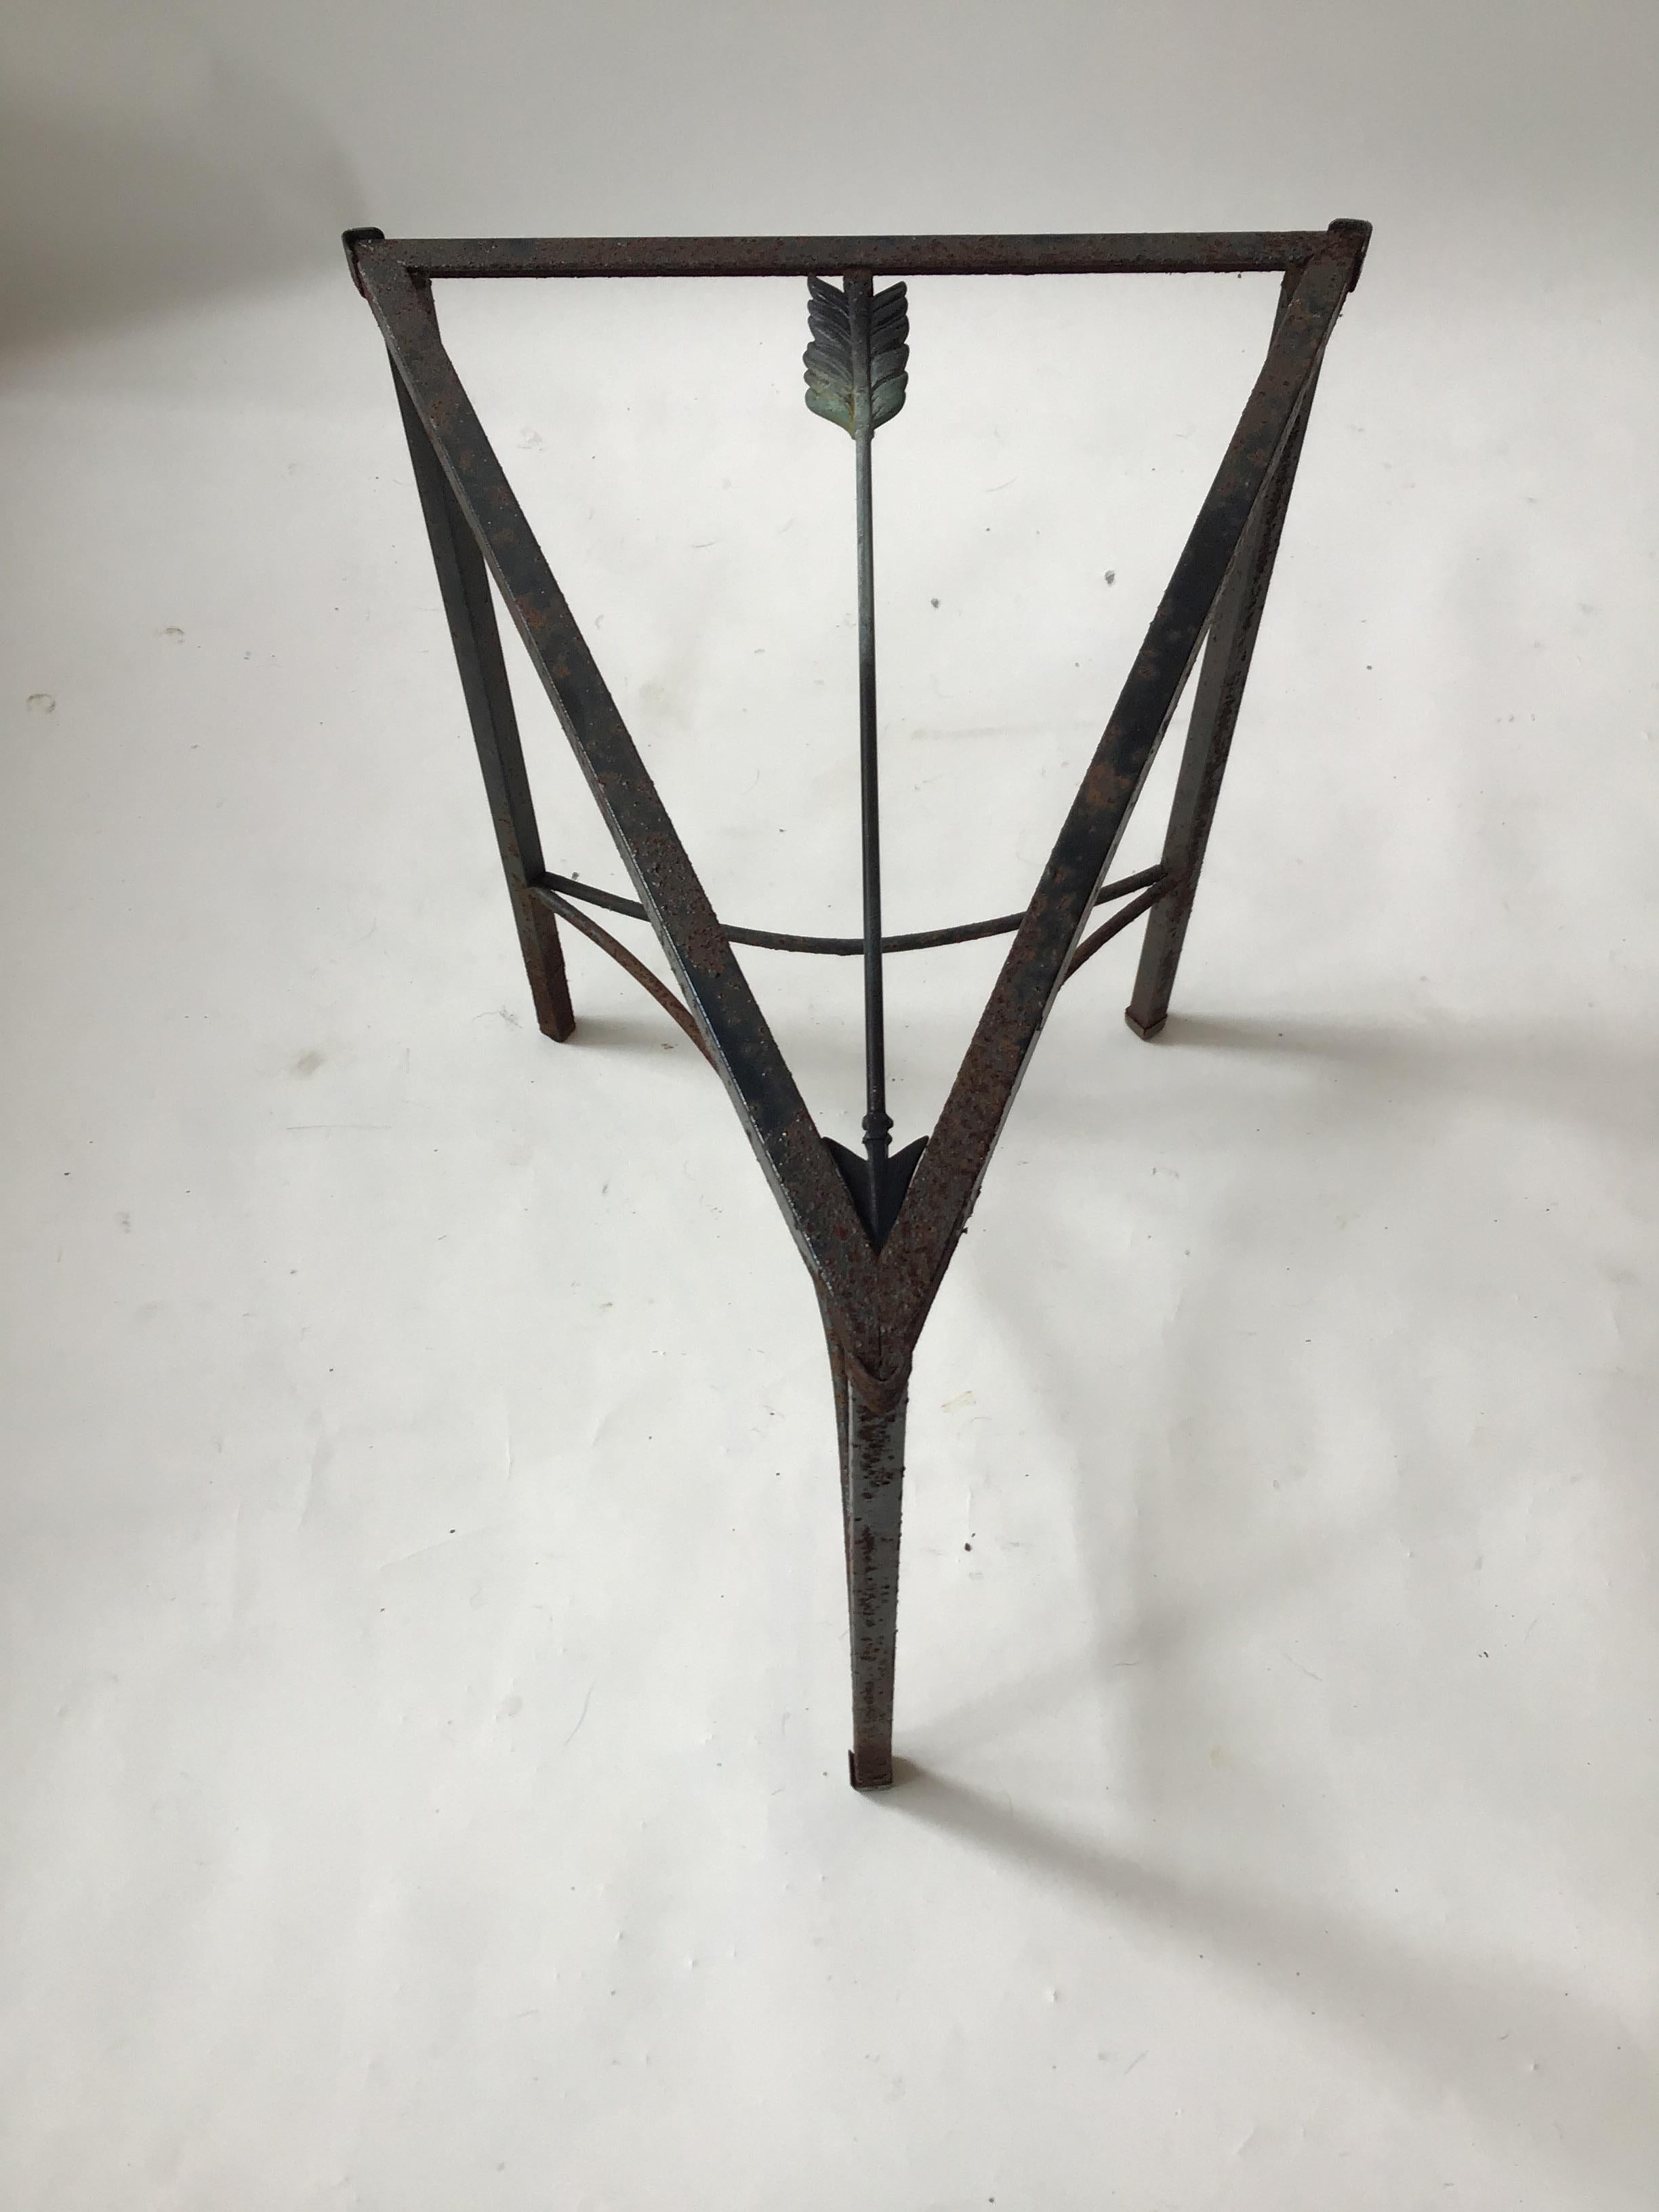 1960s iron arrow side table. Was used outdoors for years at a Westchester, NY estate. There is no glass.